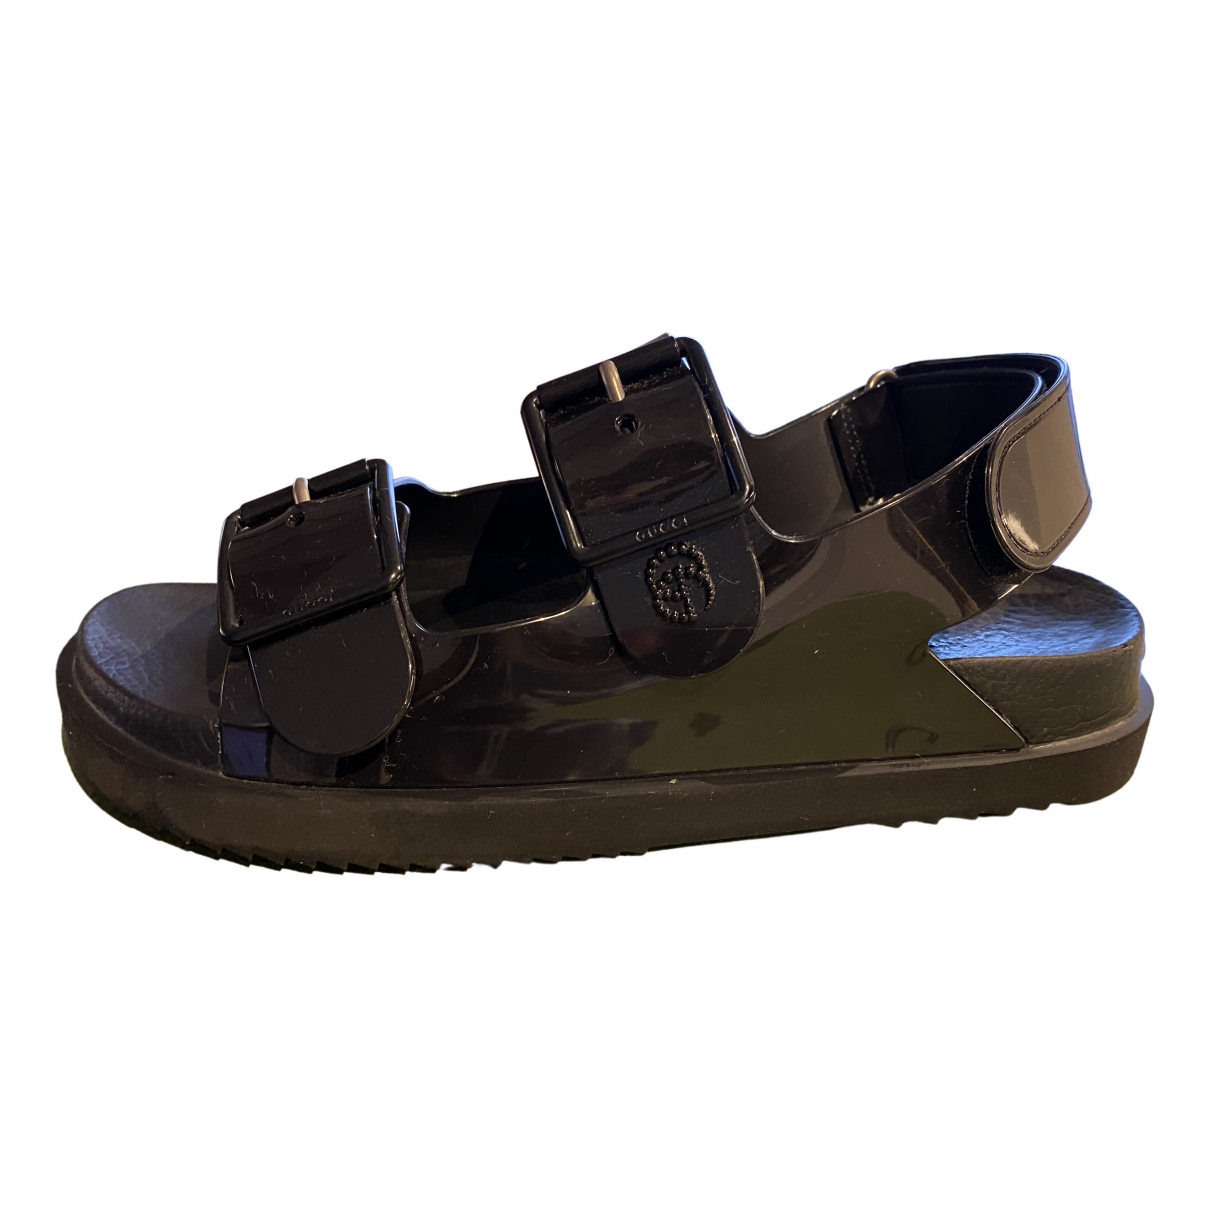 Selling rankings Double G sandals Over item handling